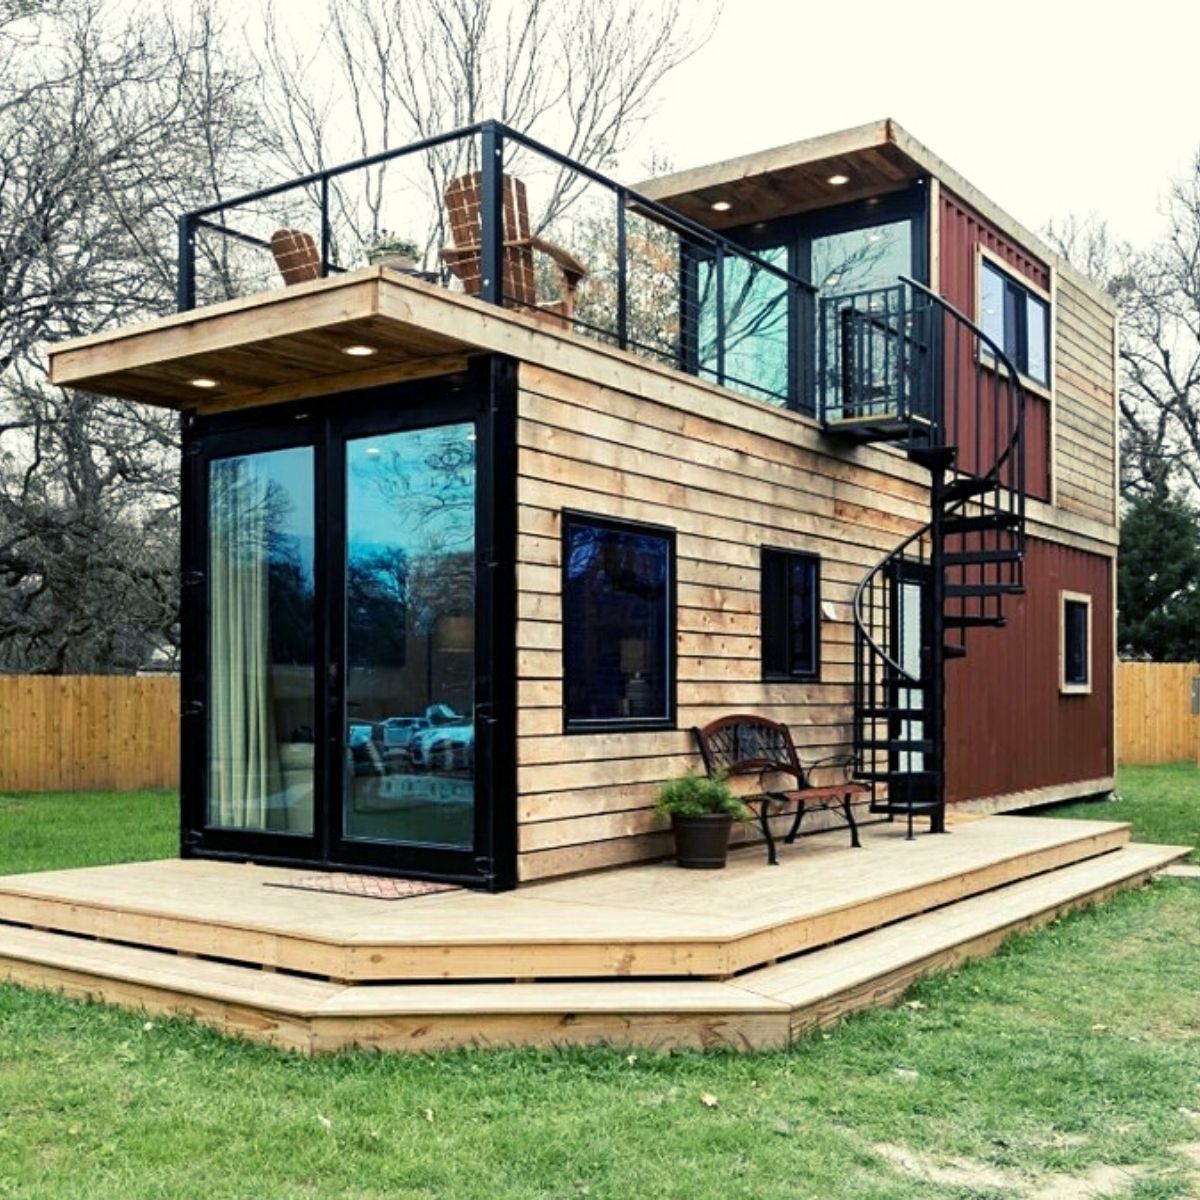 Sustainable Features In Tiny House Design